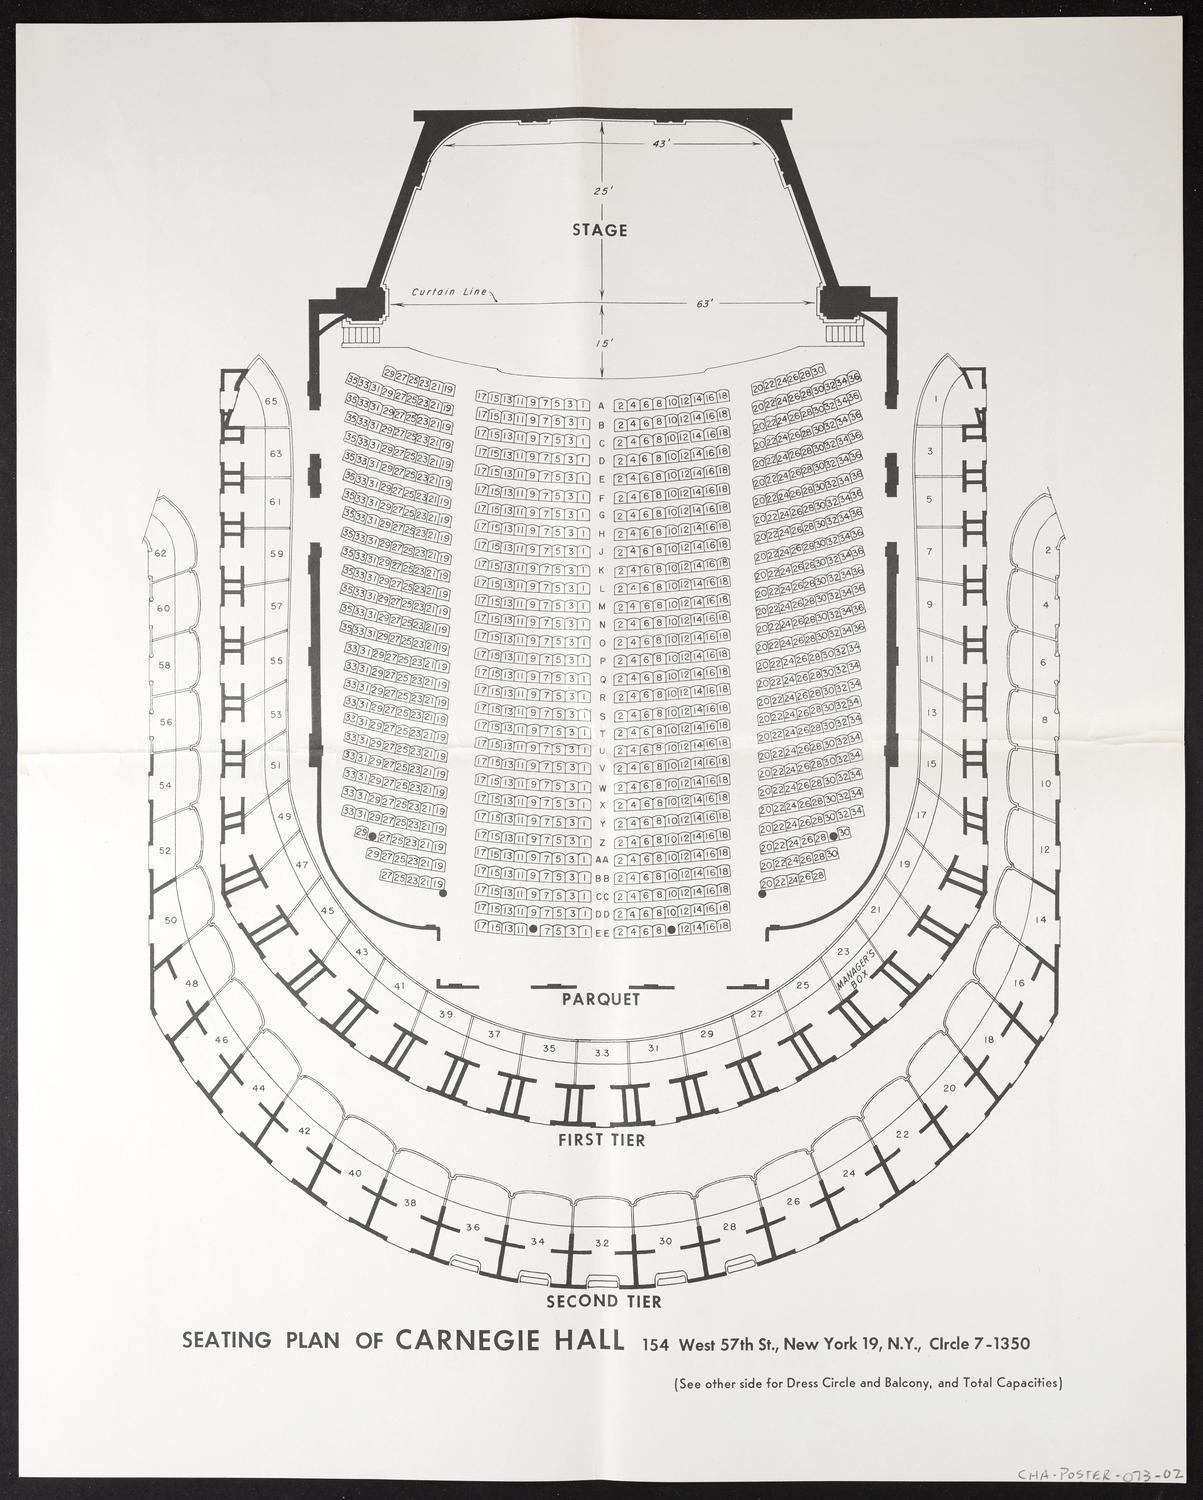 Seating plan of Main Hall (Carnegie Hall, Inc.), Parquet, First Tier, Second Tier